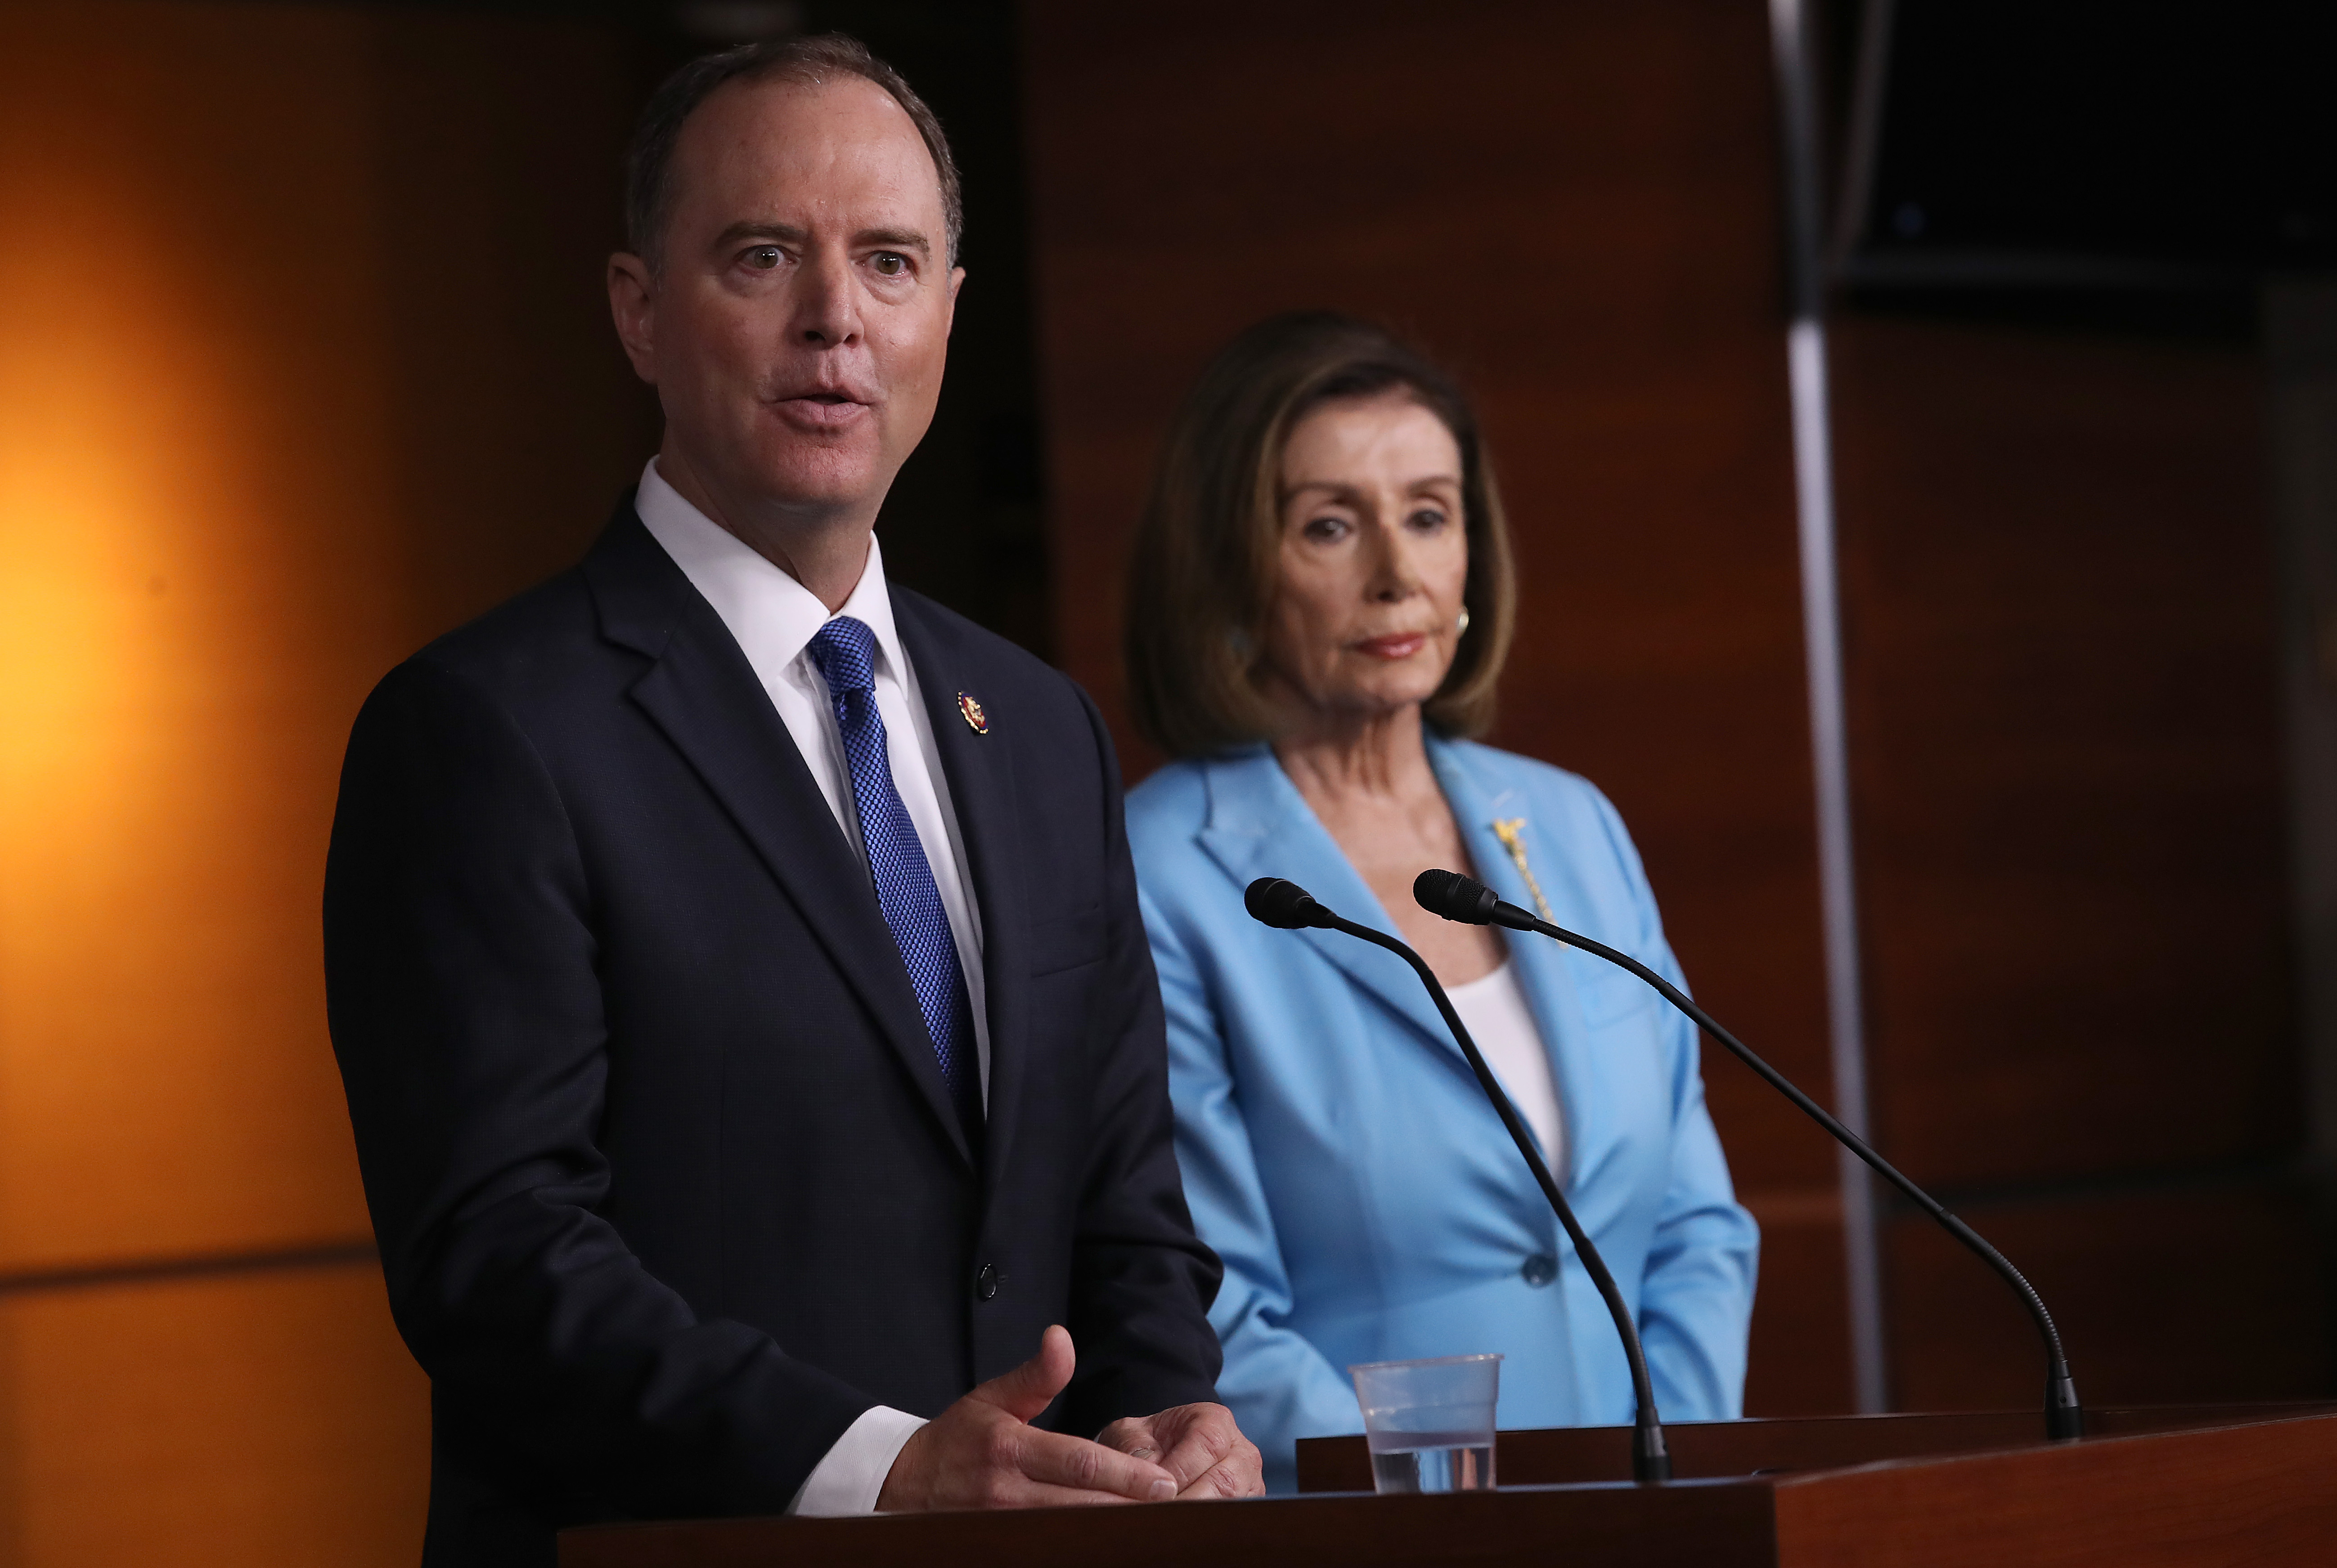 House Select Committee on Intelligence Chairman Rep. Adam Shiff (D-CA) and Speaker of the House Nancy Pelosi (D-CA) answer questions at the U.S. Capitol October 2, 2019 in Washington, DC. (Win McNamee/Getty Images)